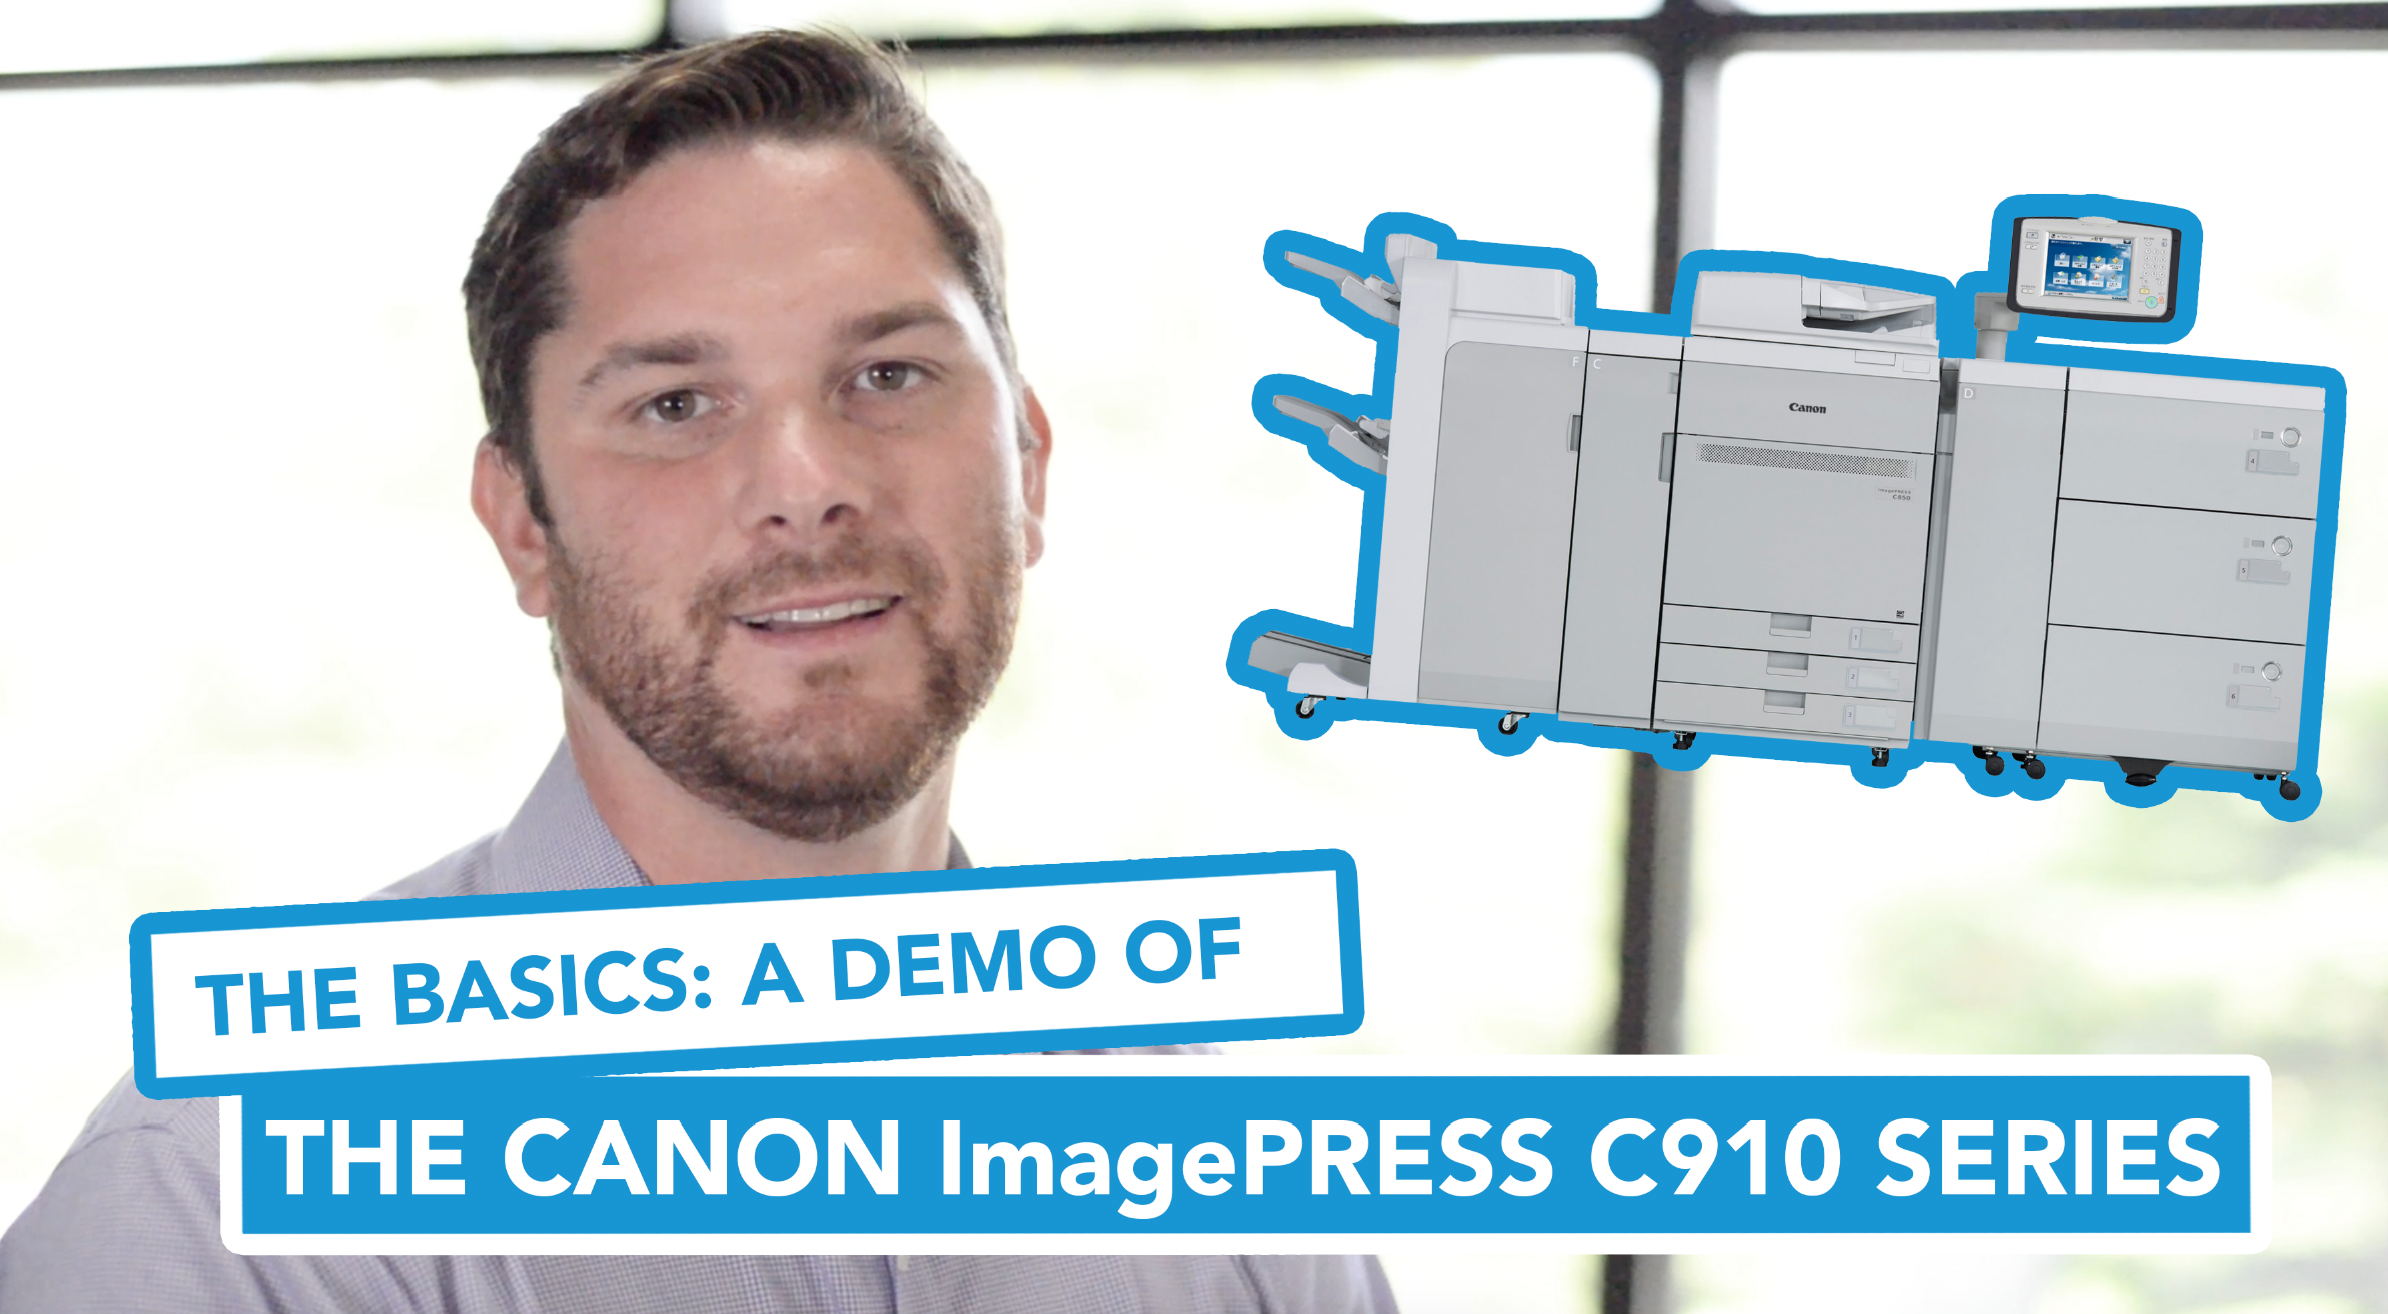 The Basics: A Demo of the Canon Imagepress C910 Series